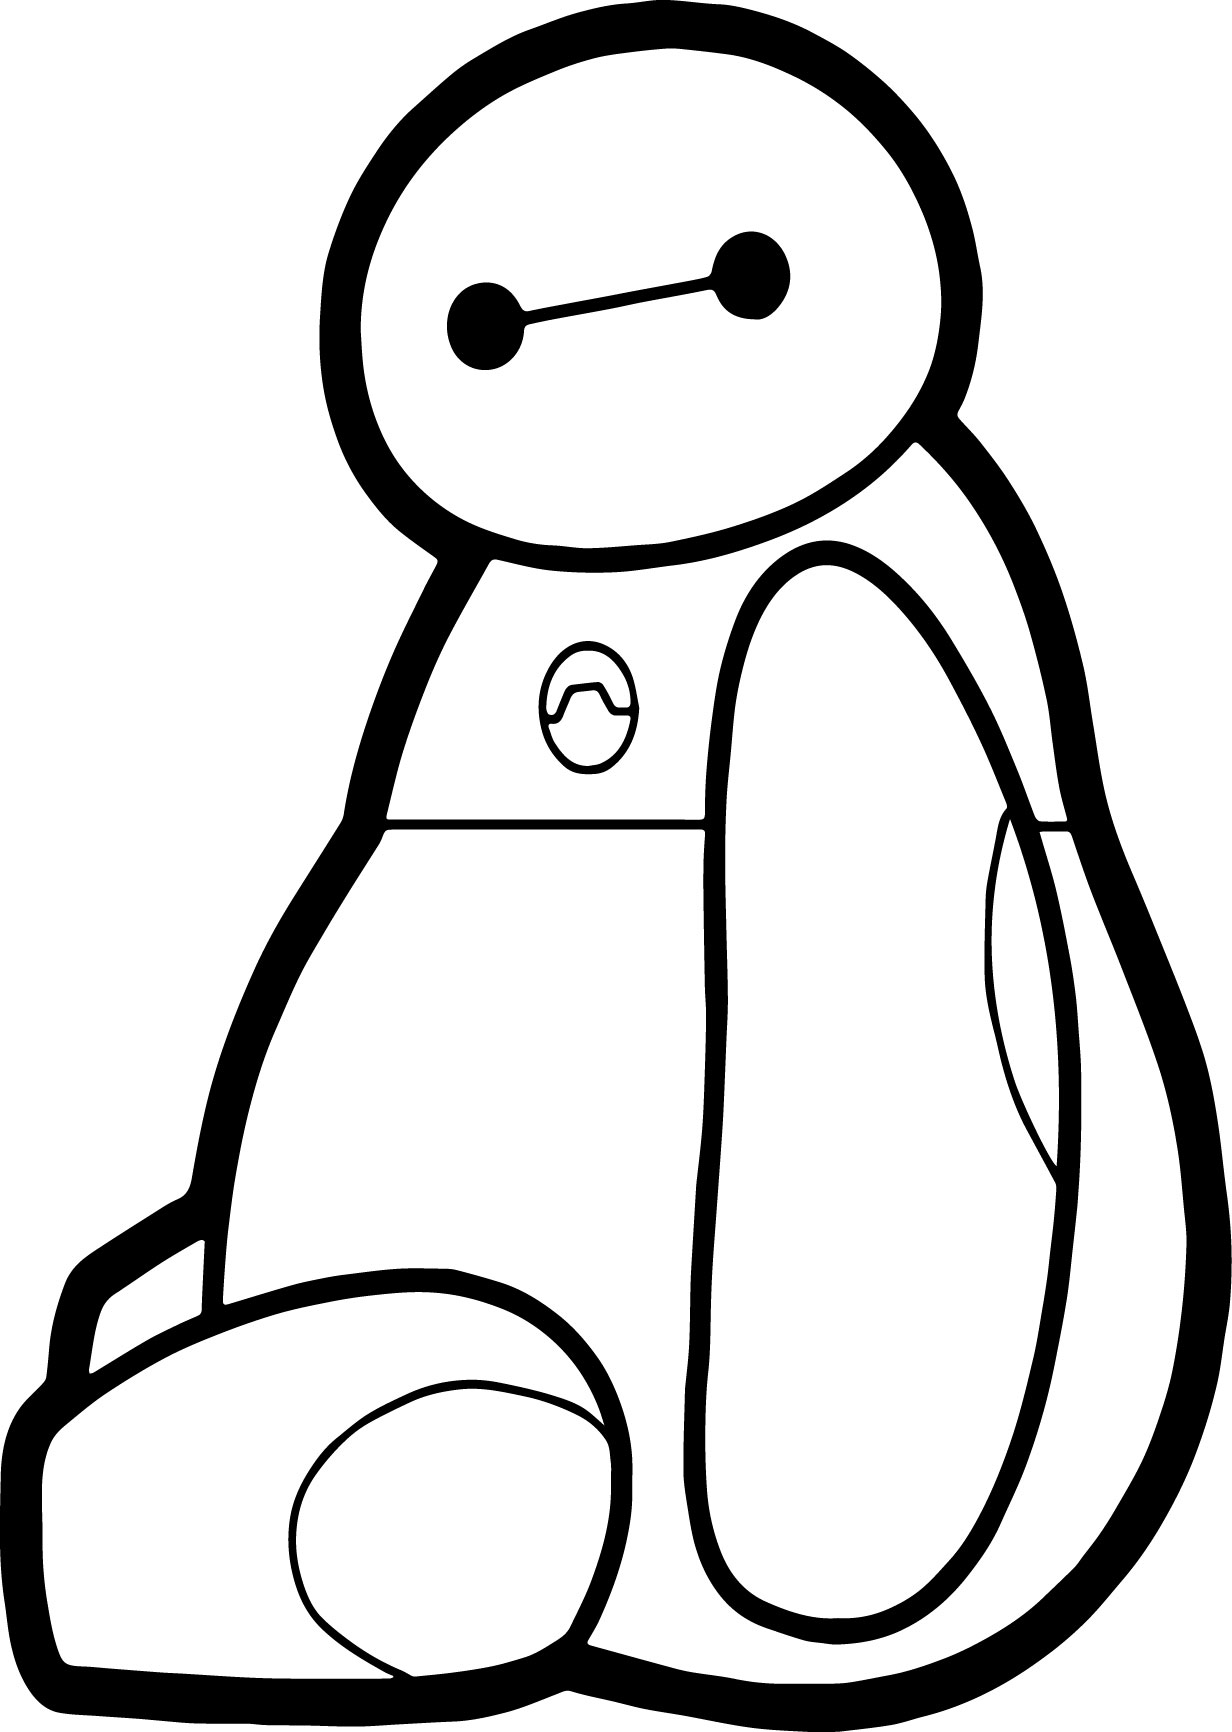 Baymax Coloring Pages at GetColorings.com | Free printable colorings